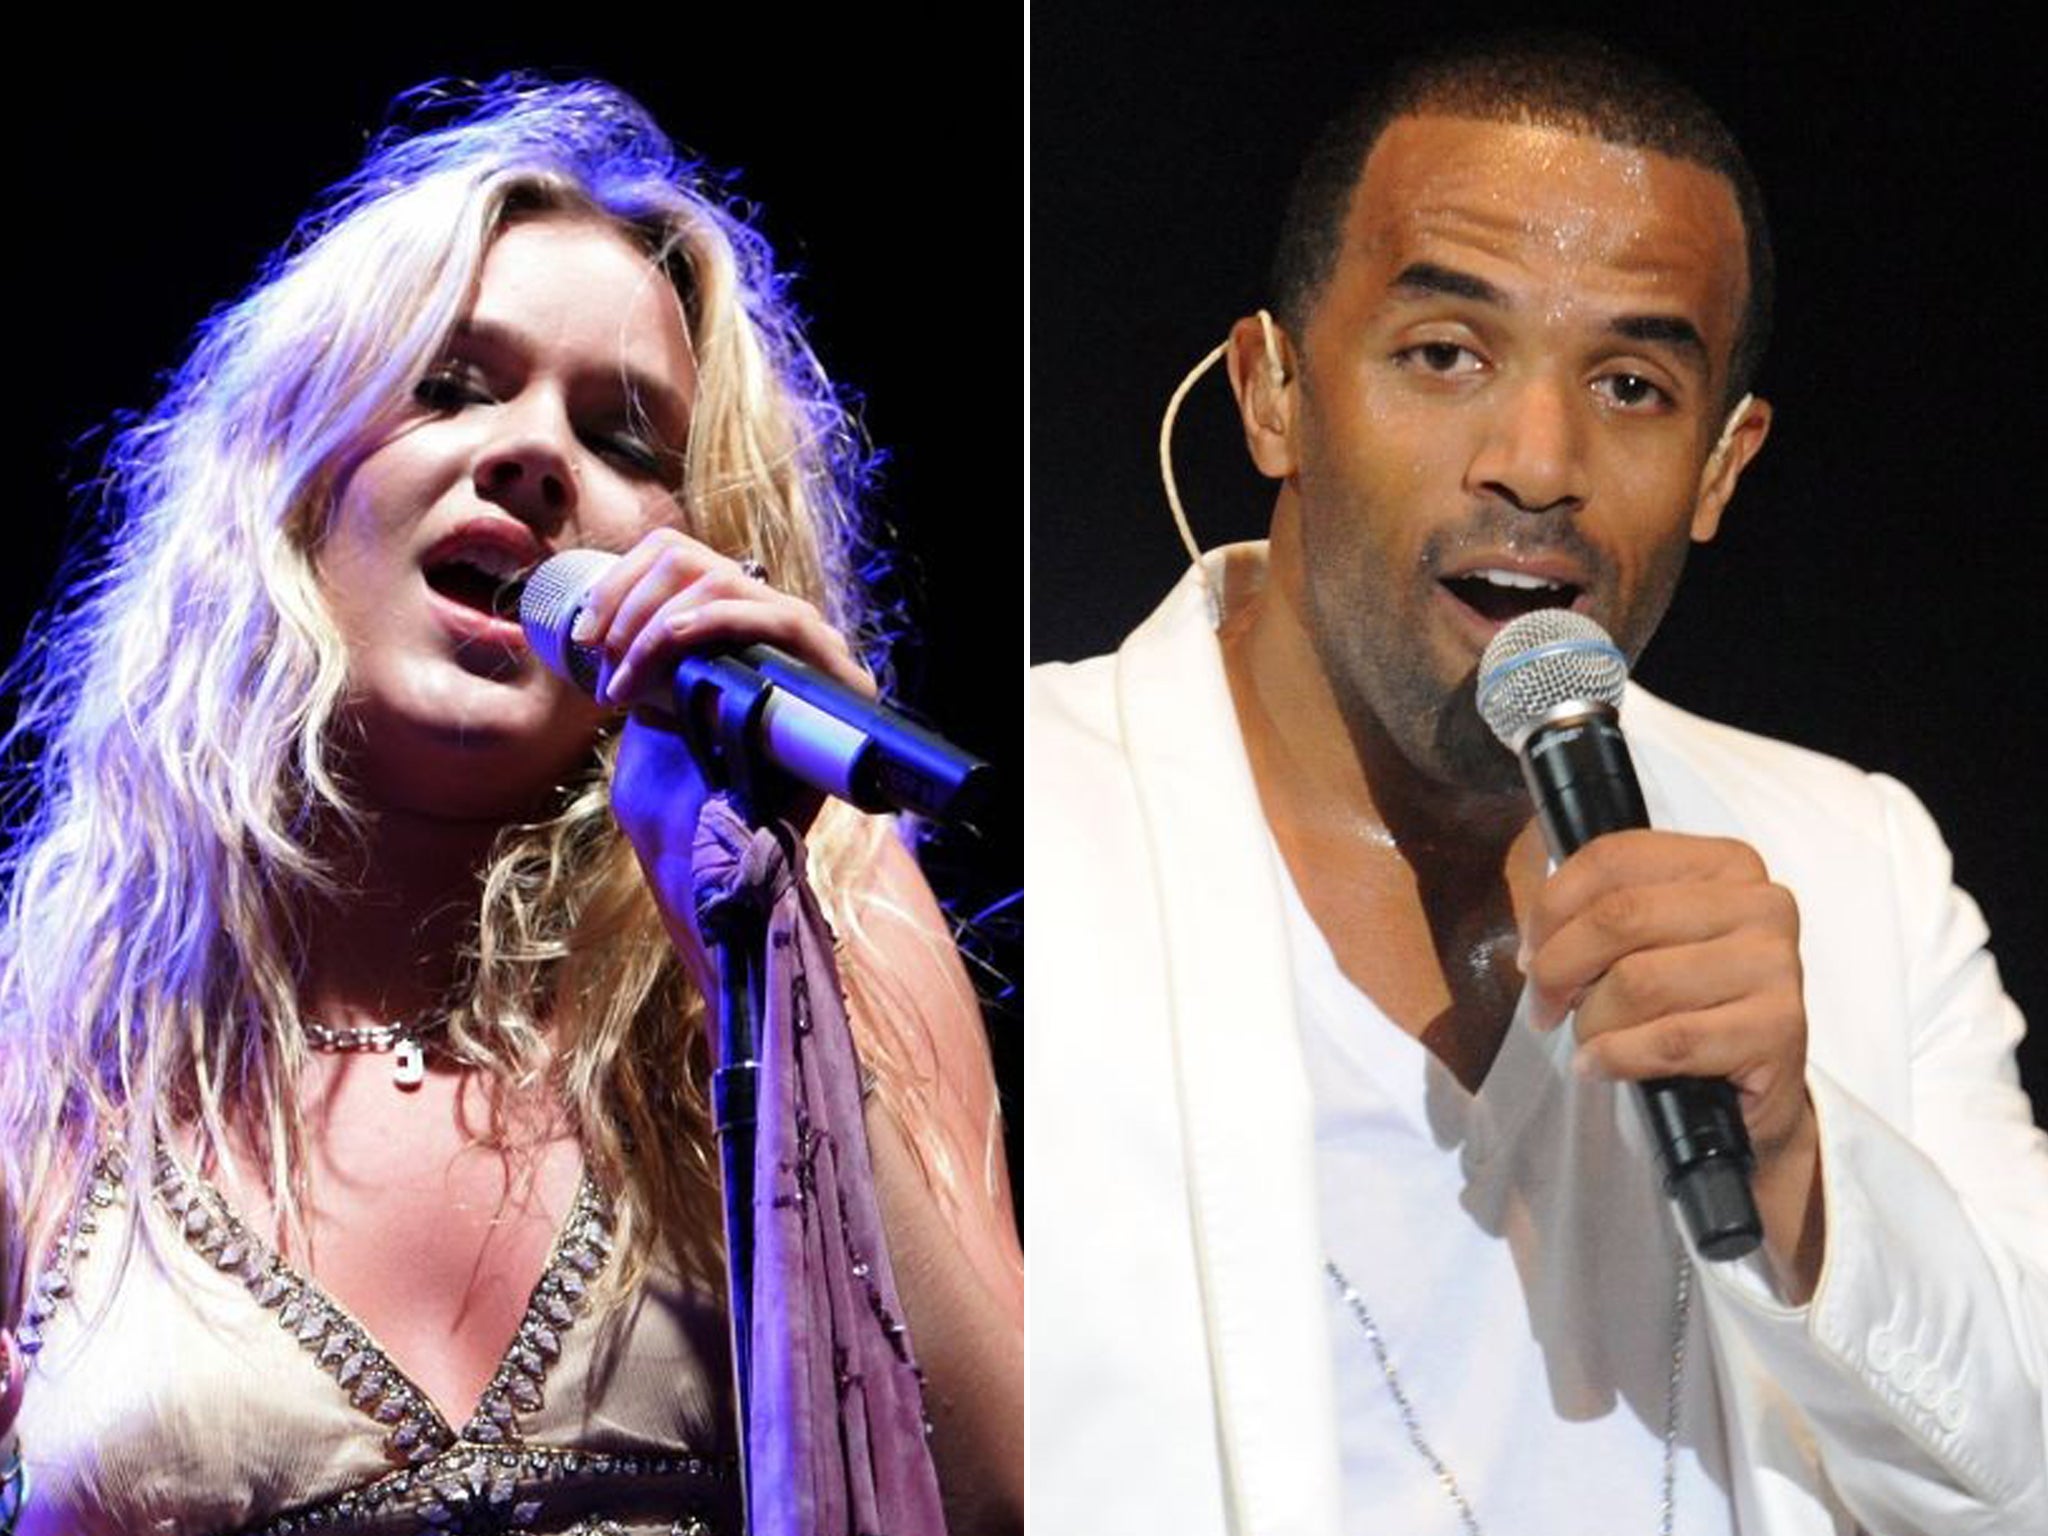 Joss Stone and Craig David will play at the Java Jazz Festival this weekend